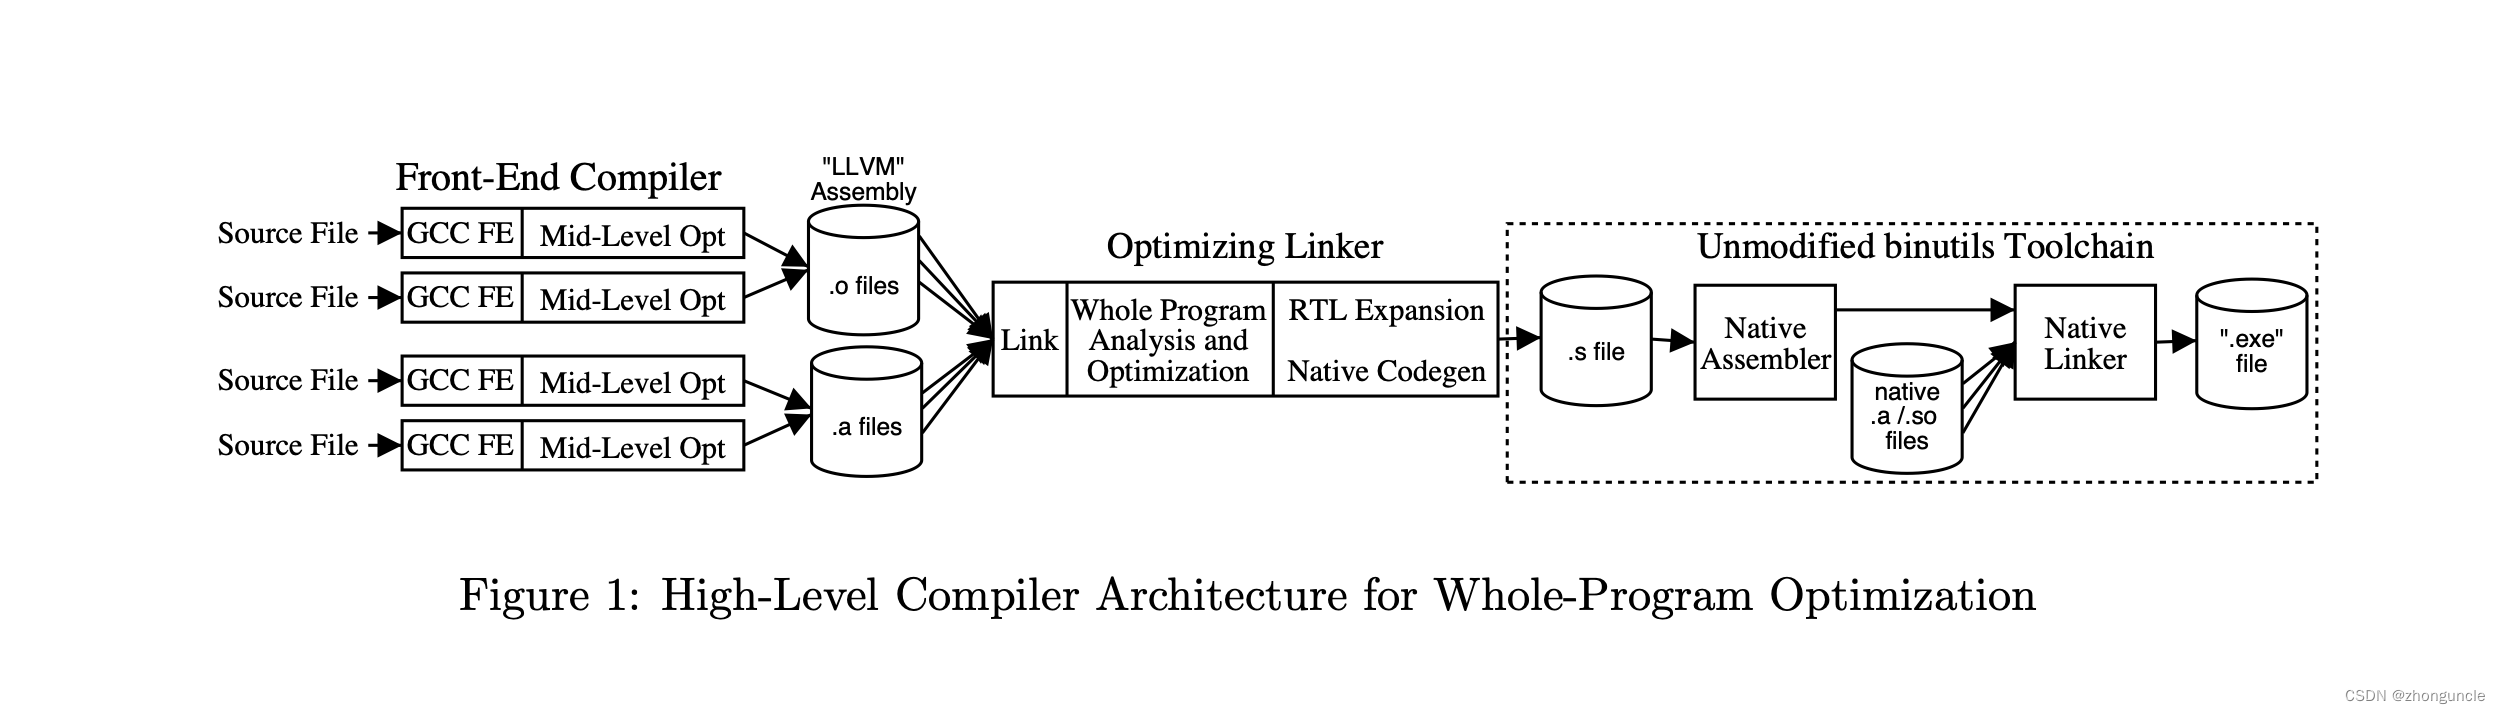 LLVM compiler in Architecture for a Next-Generation GCC